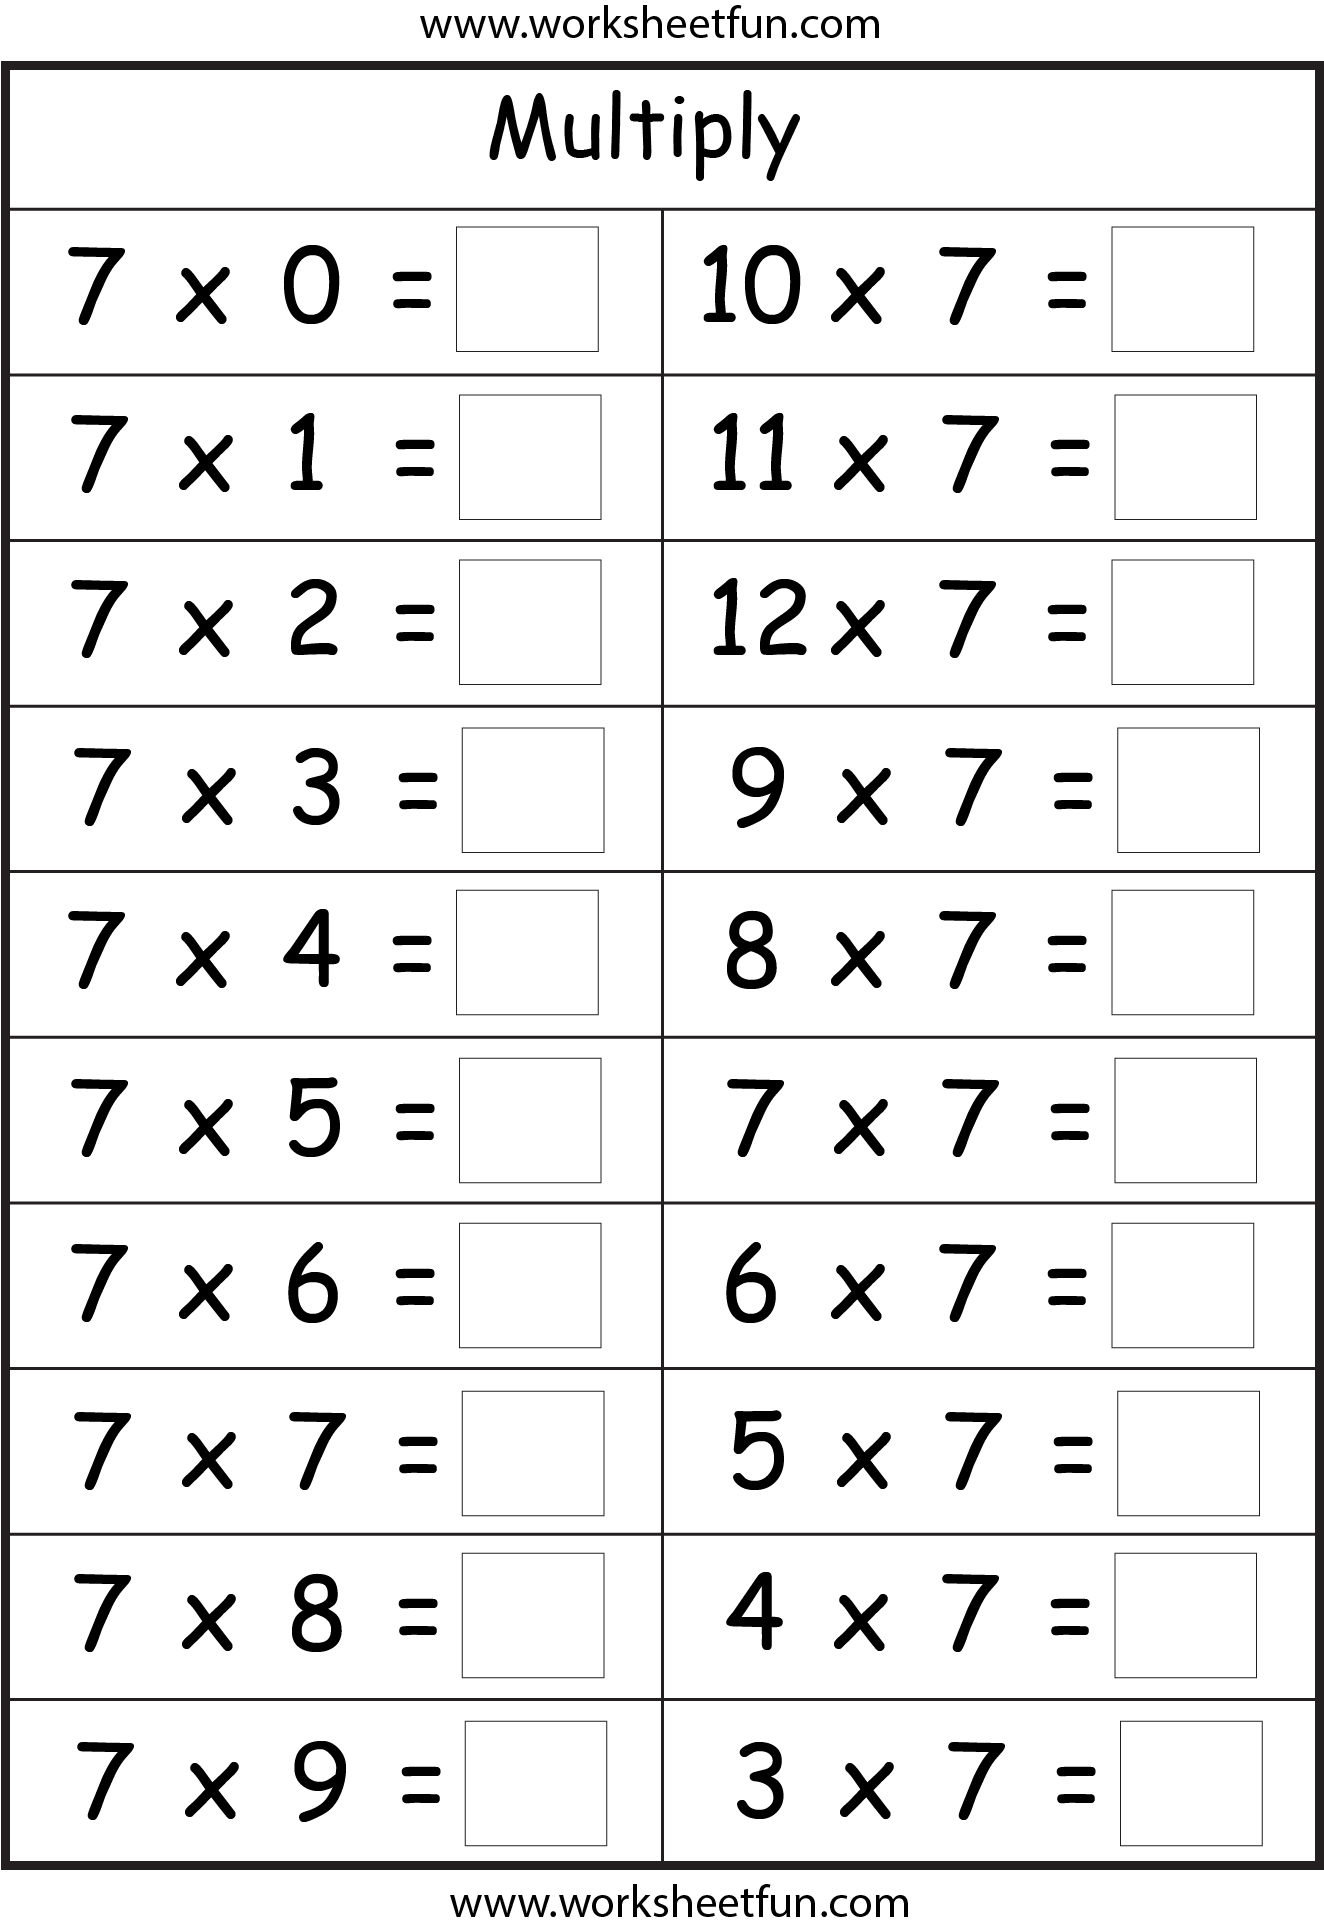 Multiplication Basic Facts - 2, 3, 4, 5, 6, 7, 8 & 9 Times ...